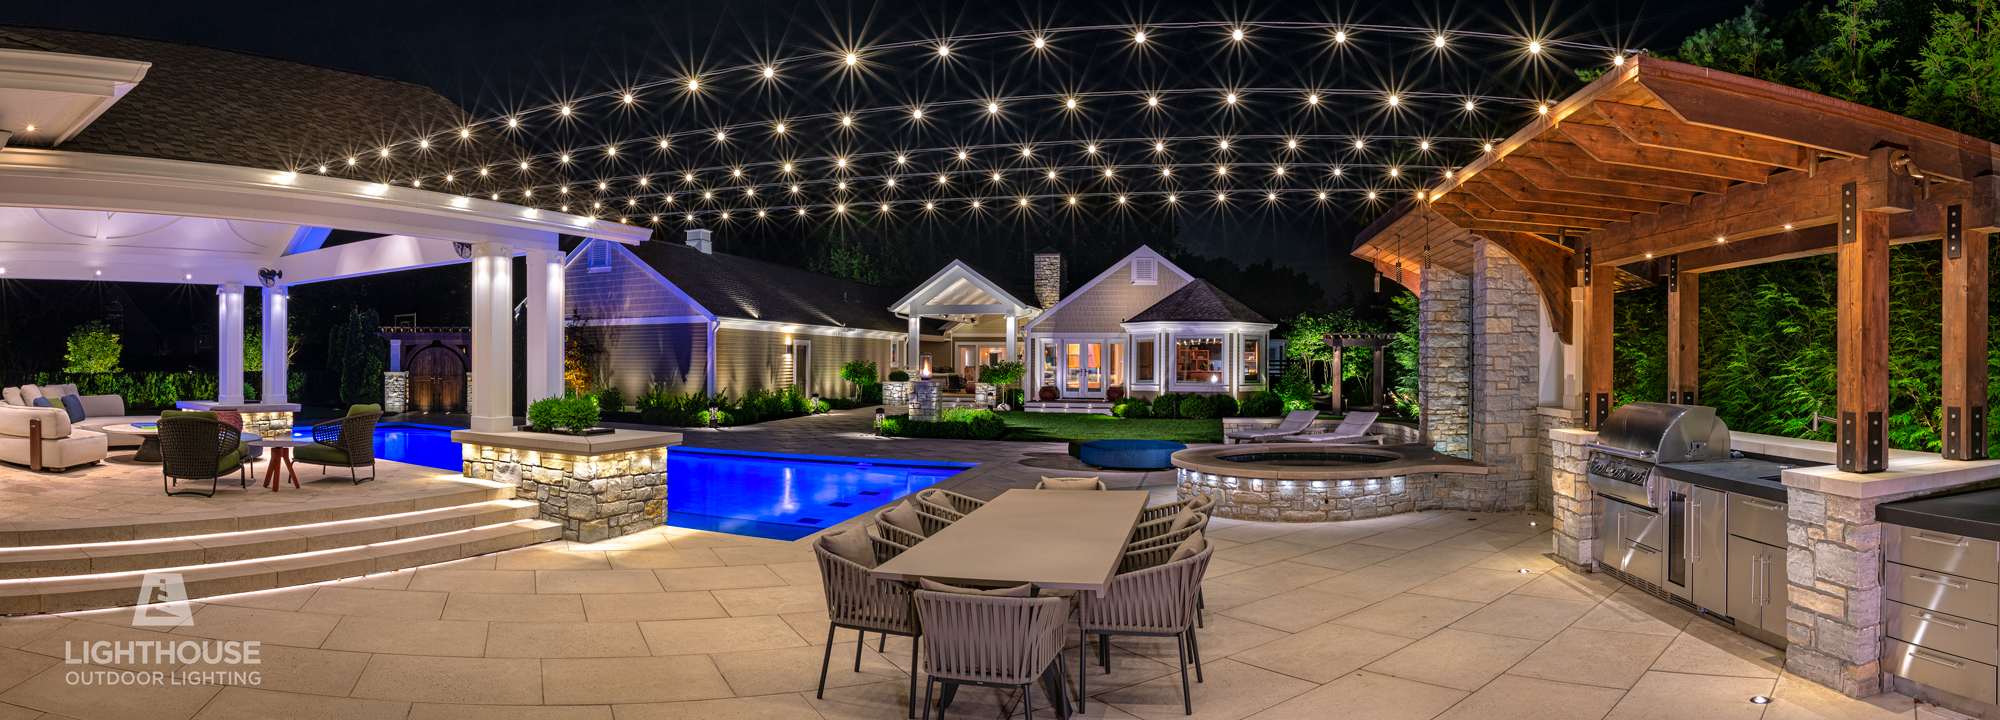 Patio String Lighting in South Coatesville, PA